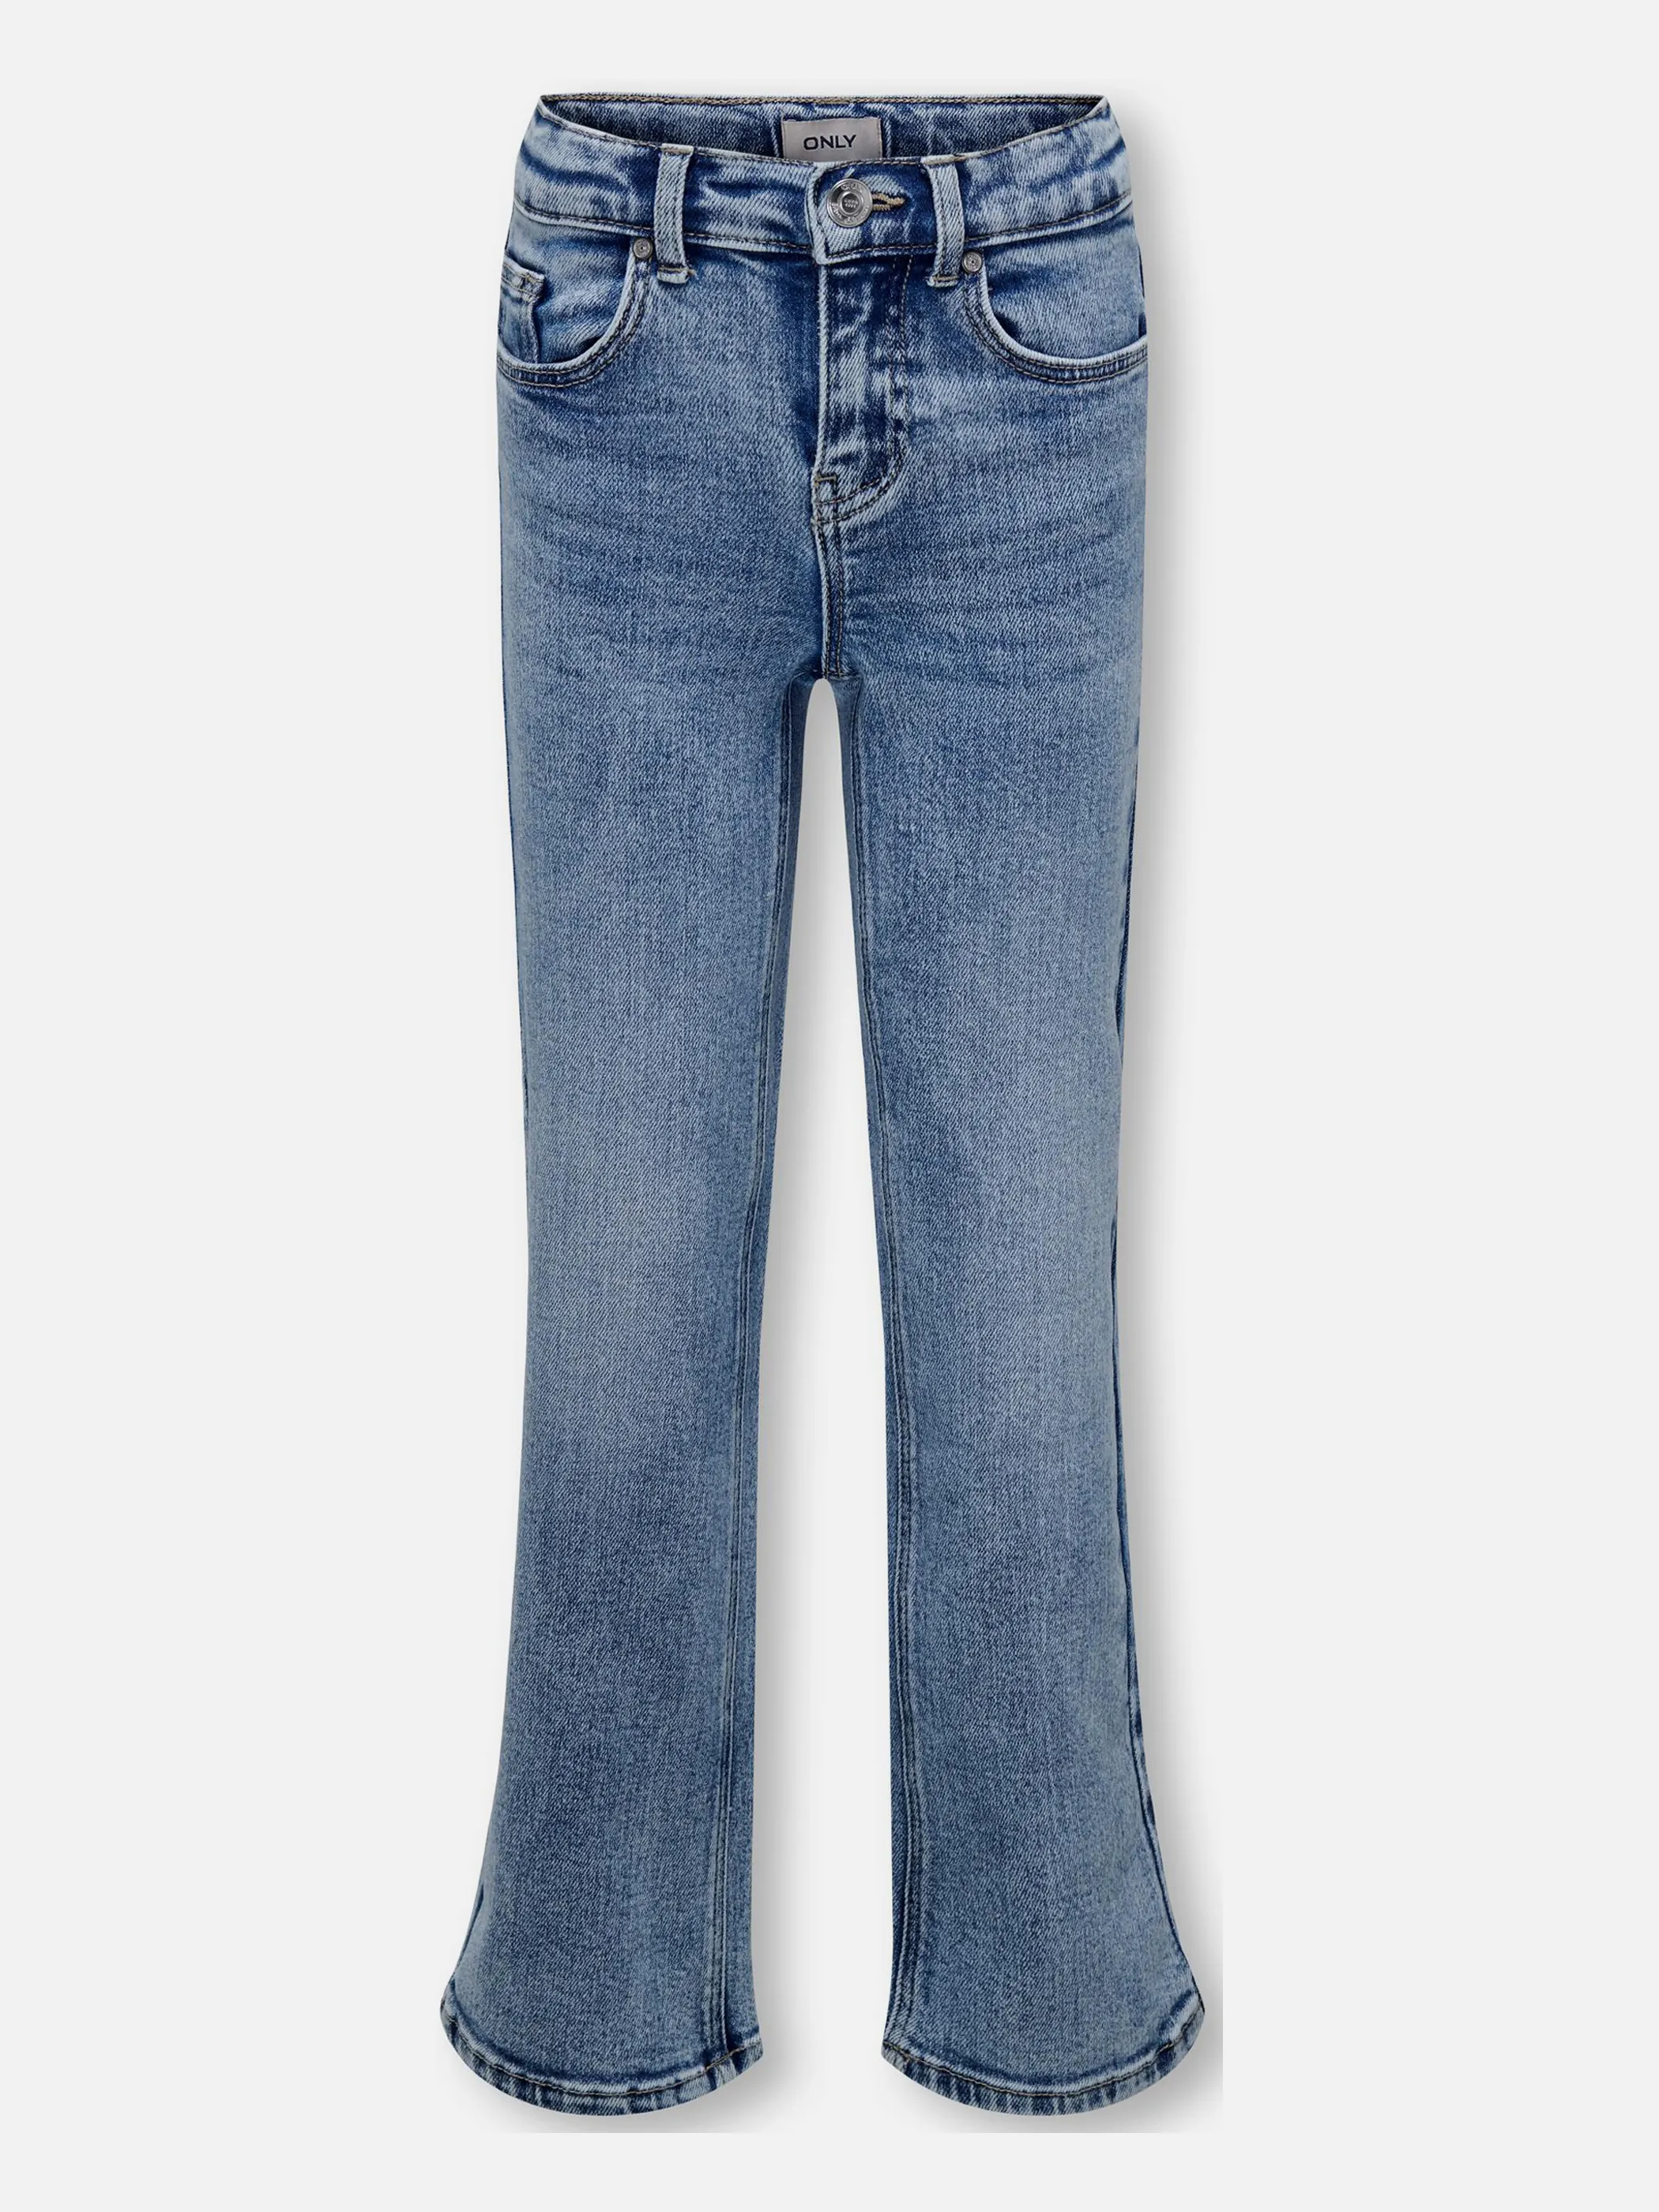 LEG WIDE Jeans | | KOGJUICY DNM Only Kids 177934 noSize 878092-0177934 |